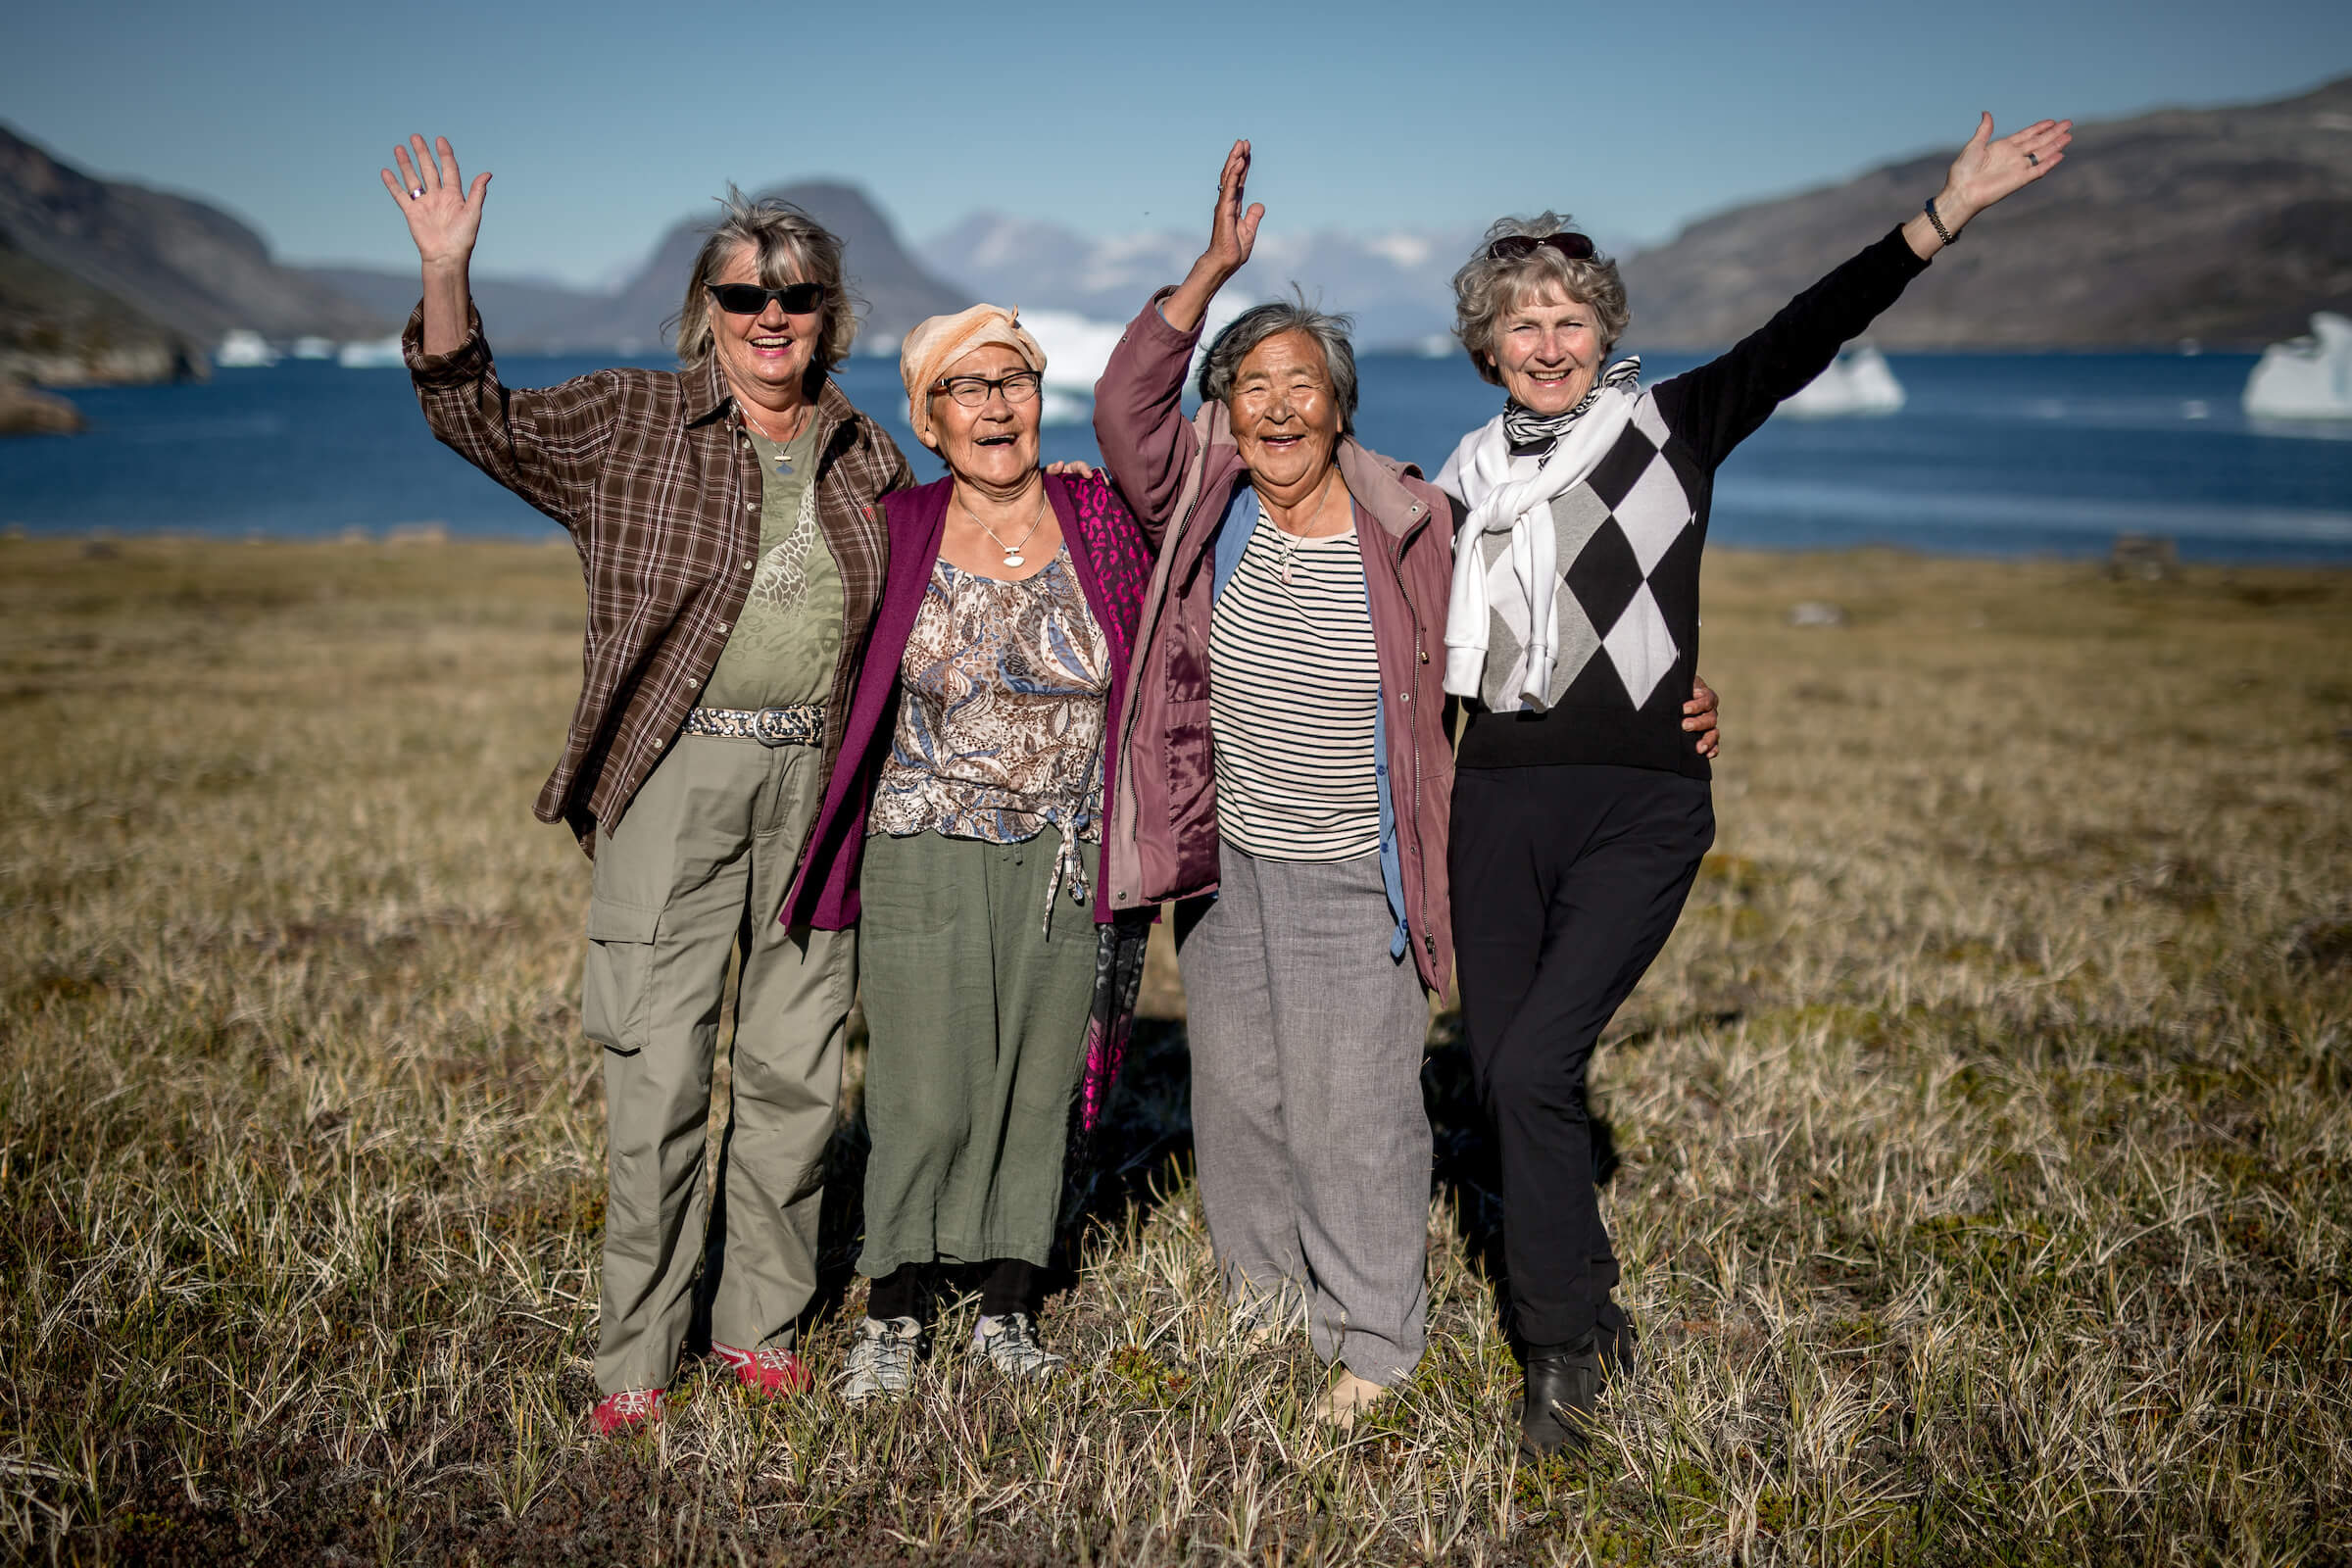 Four women waving hello in Narsaq in South Greenland. Photo by Mads Pihl